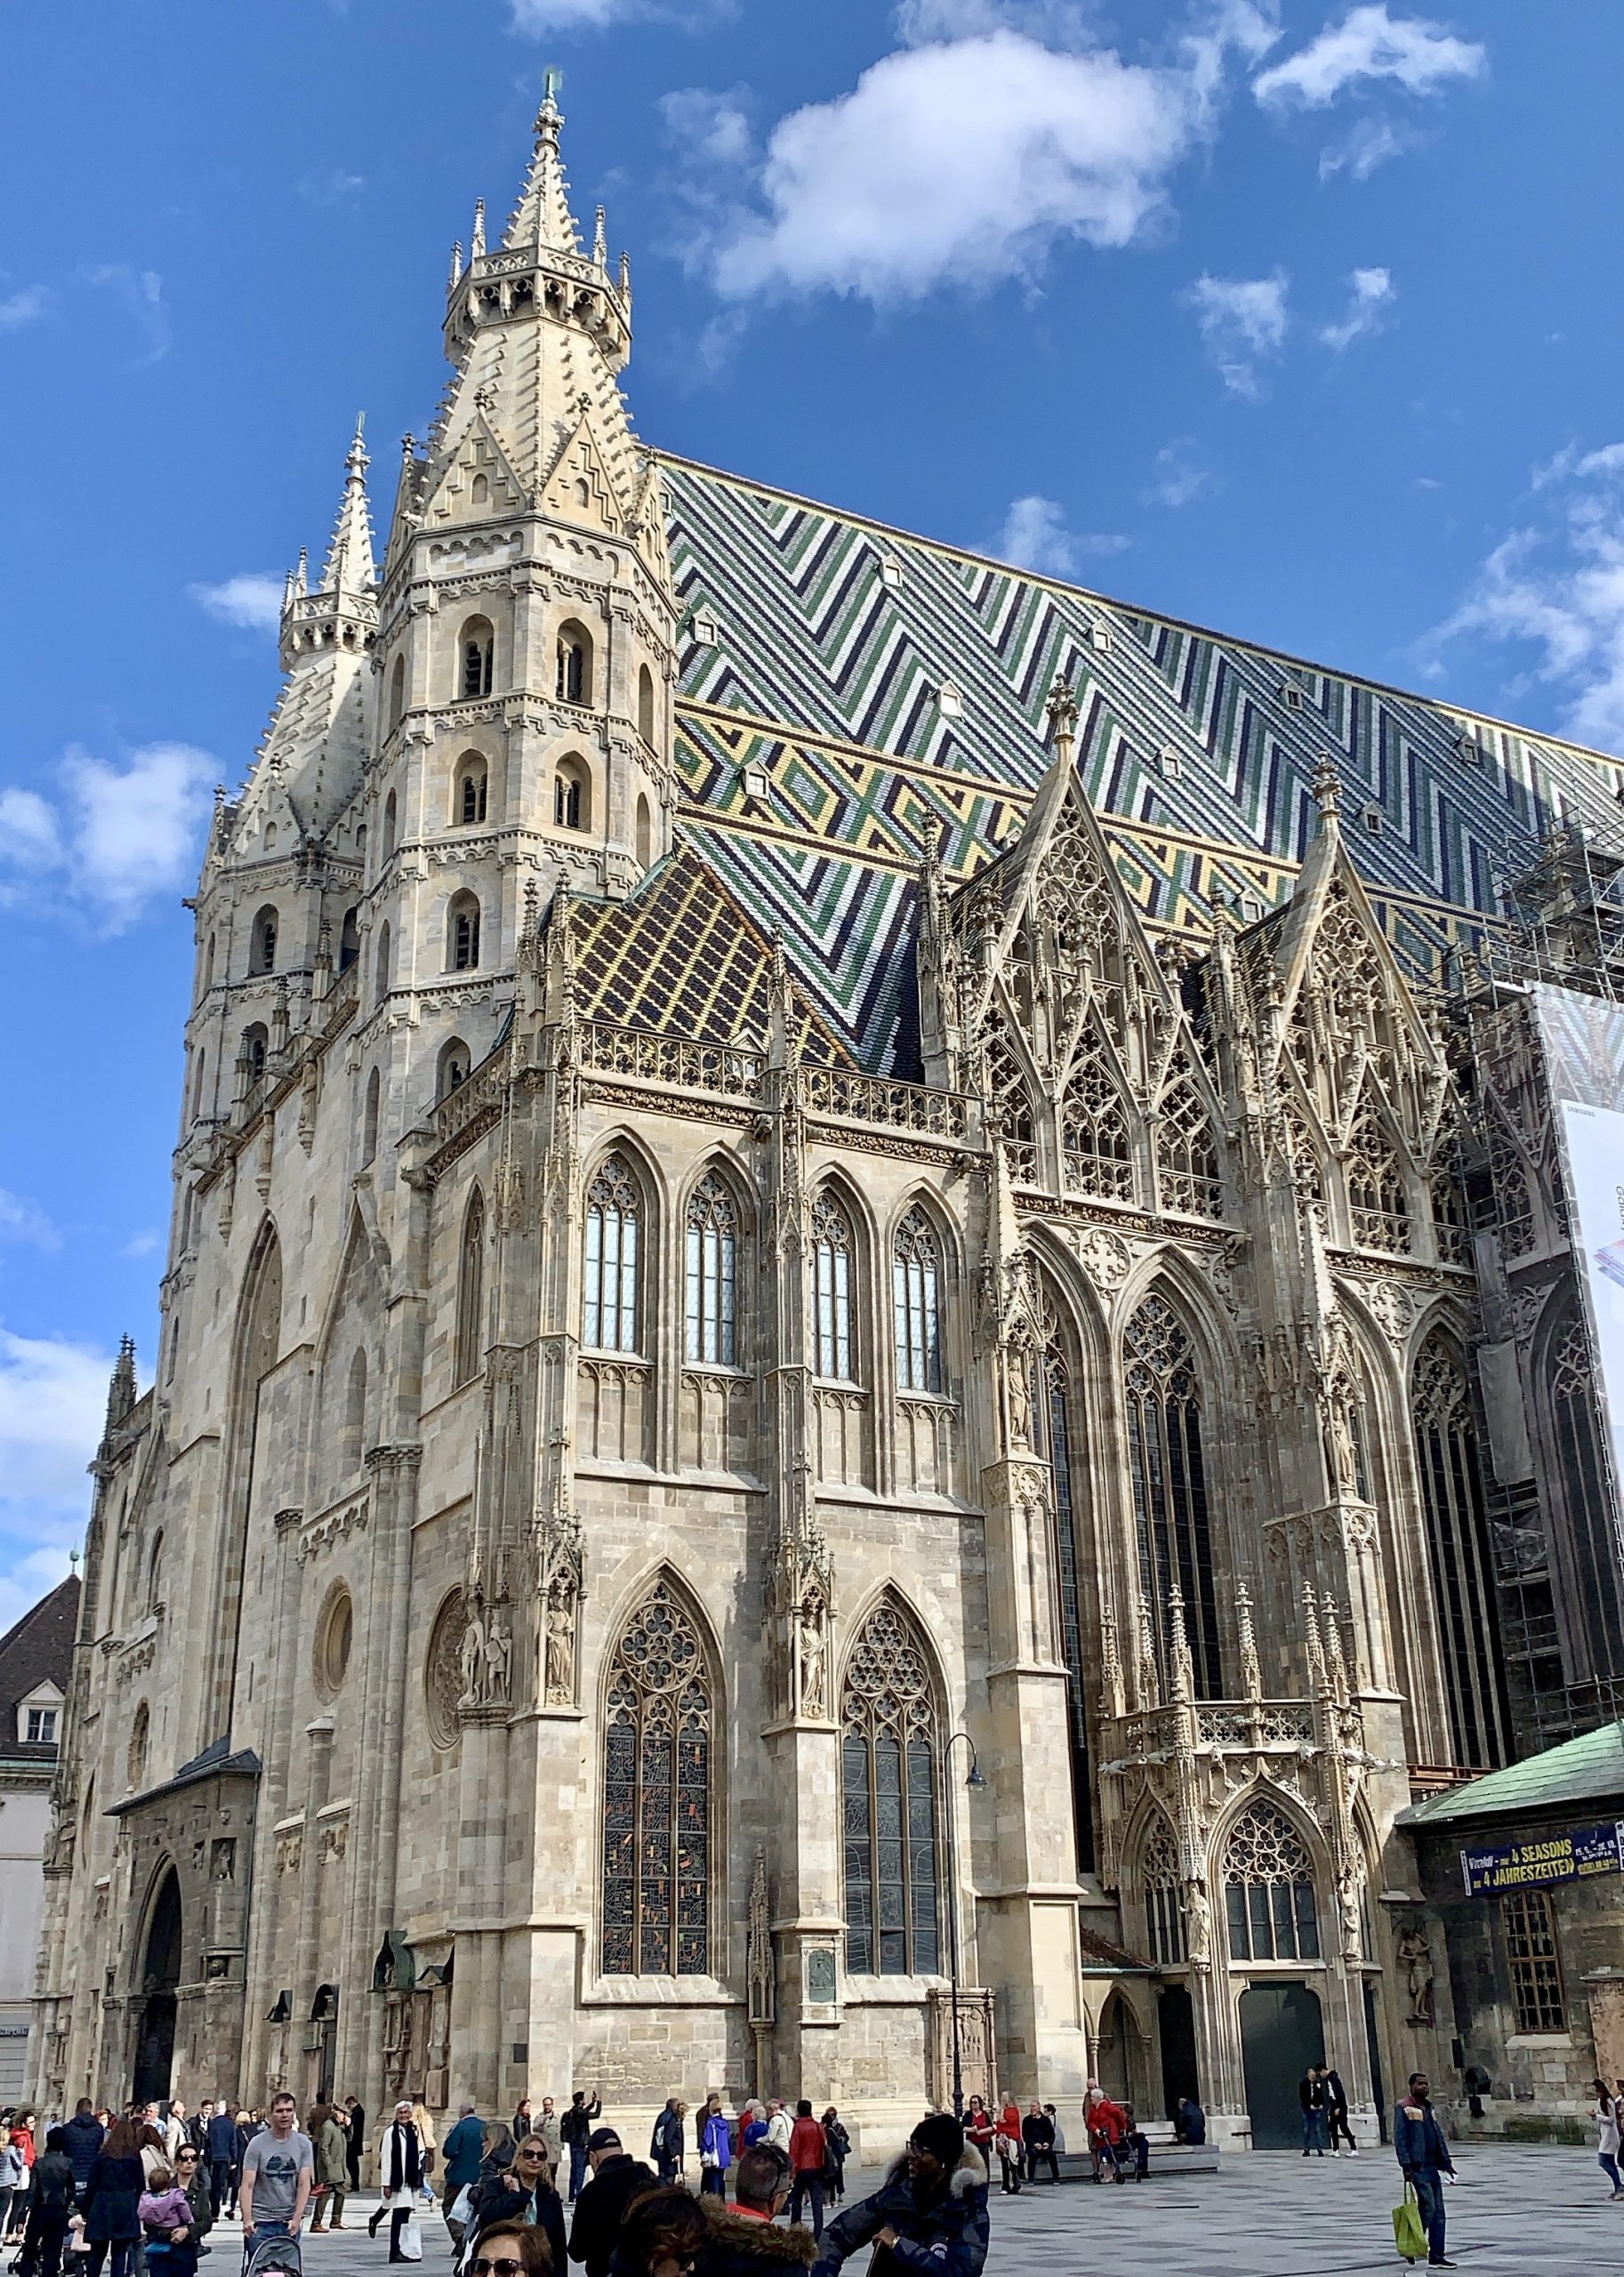 St Stephen's Cathedral